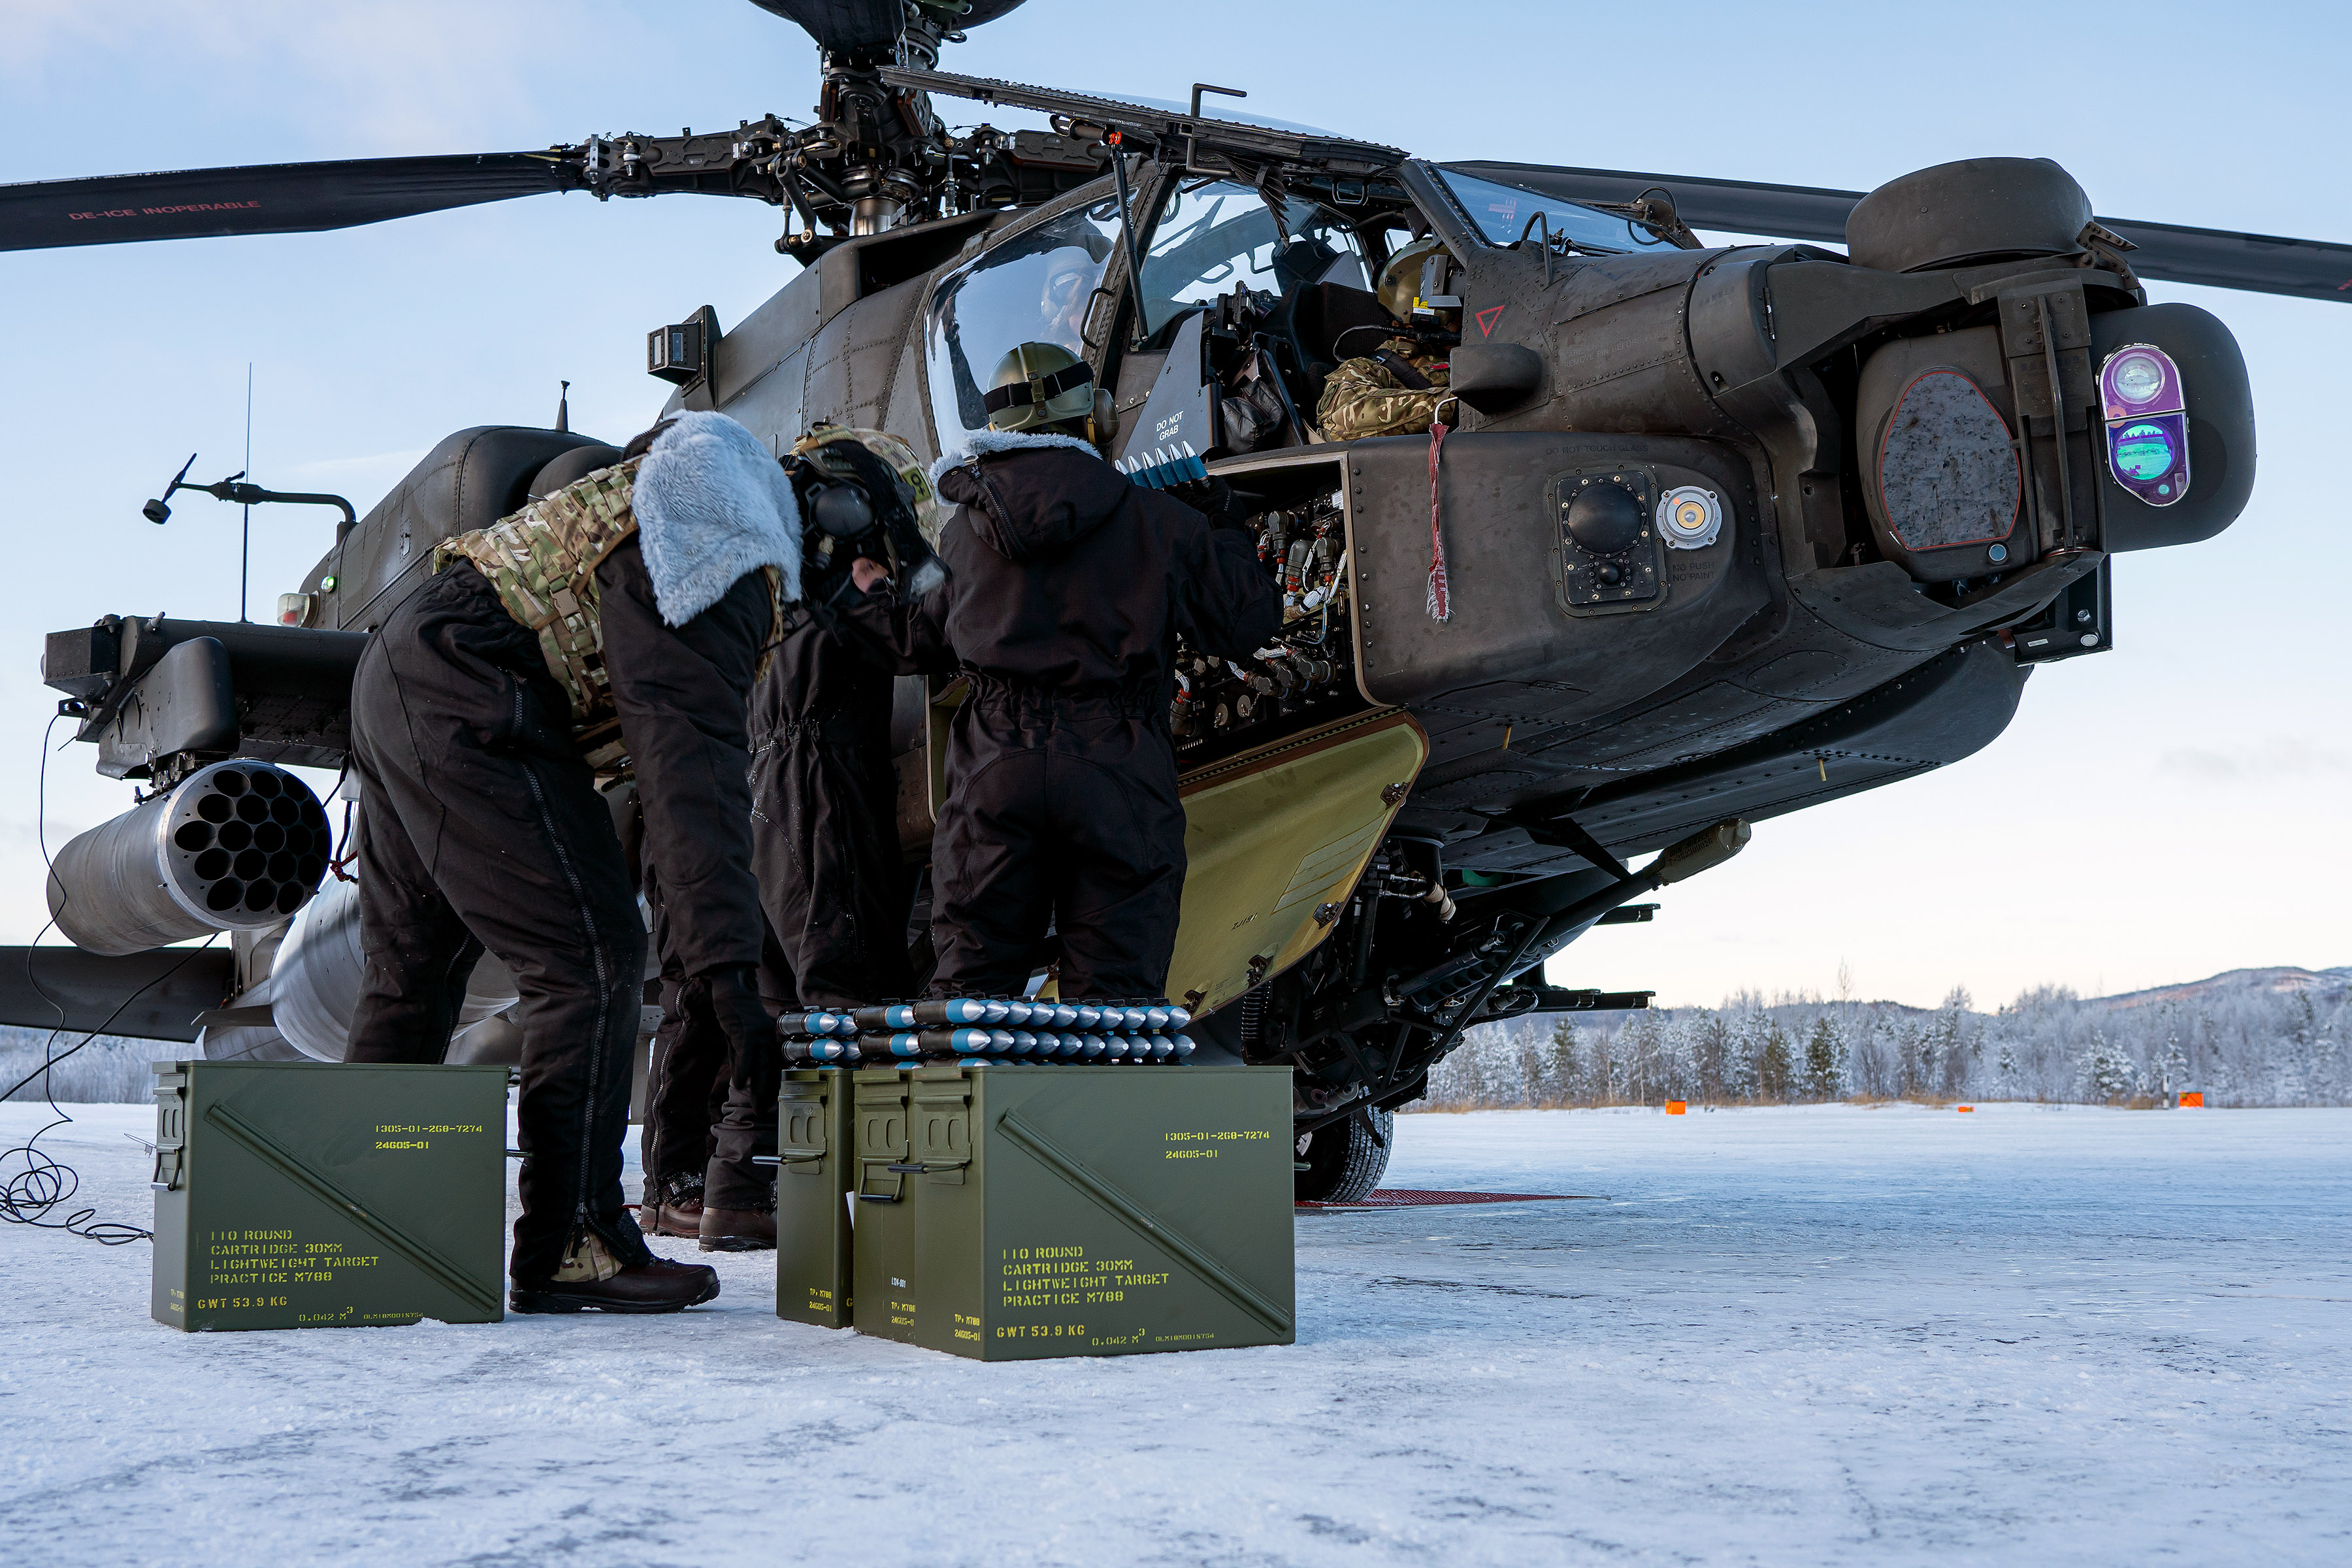 British Army Apache Attack Helicopters Tested in Arctic Circle